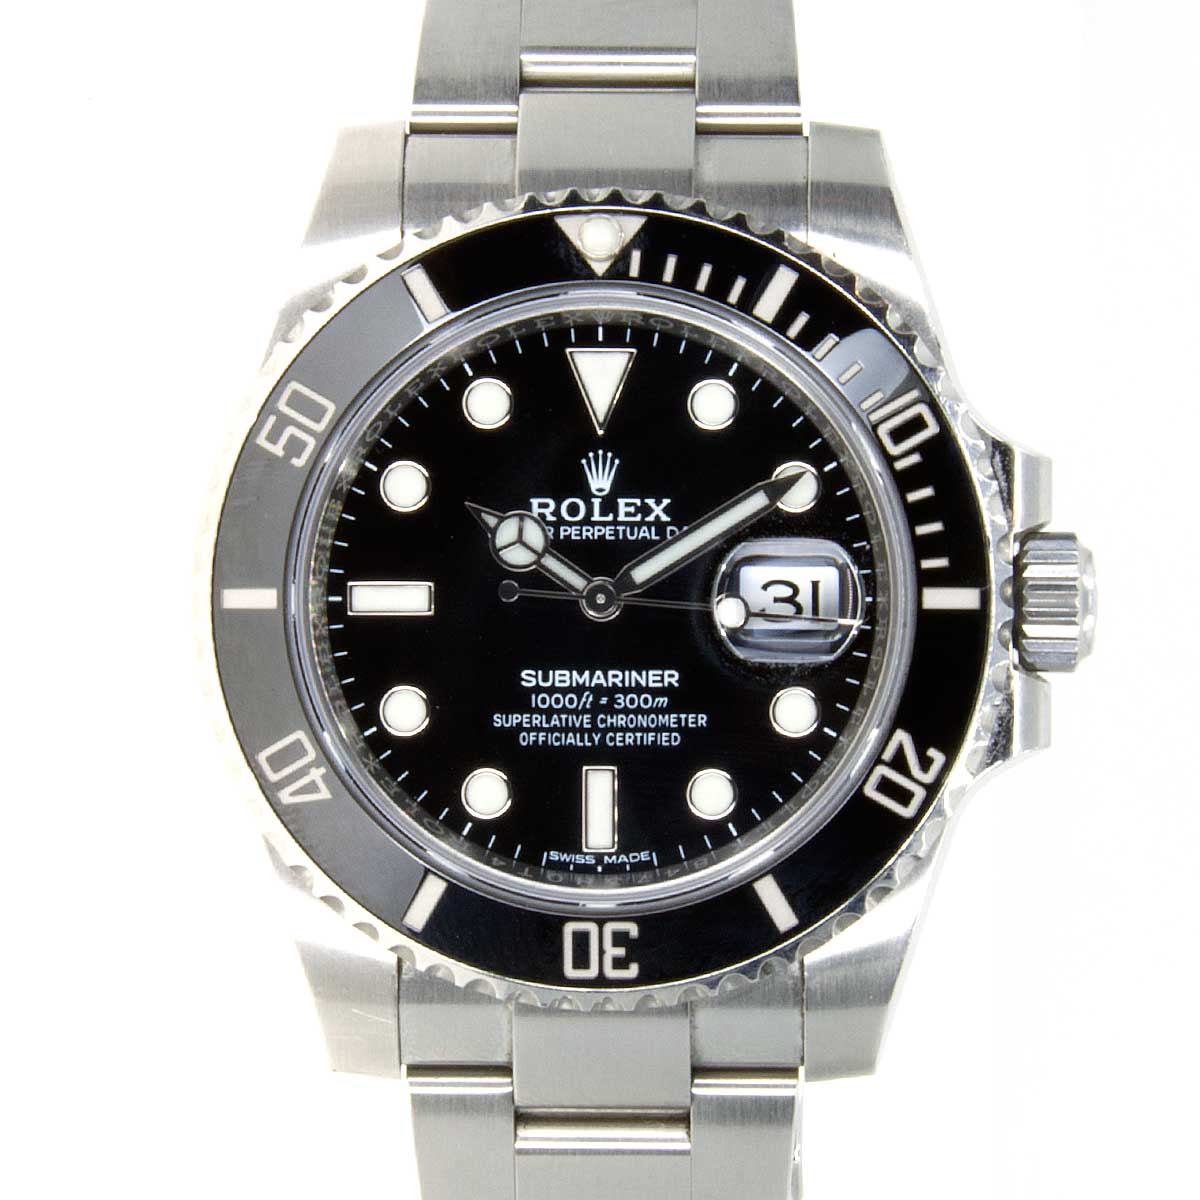 The Black Rolex Submariner: A Stainless Steel and Ceramic Favorite